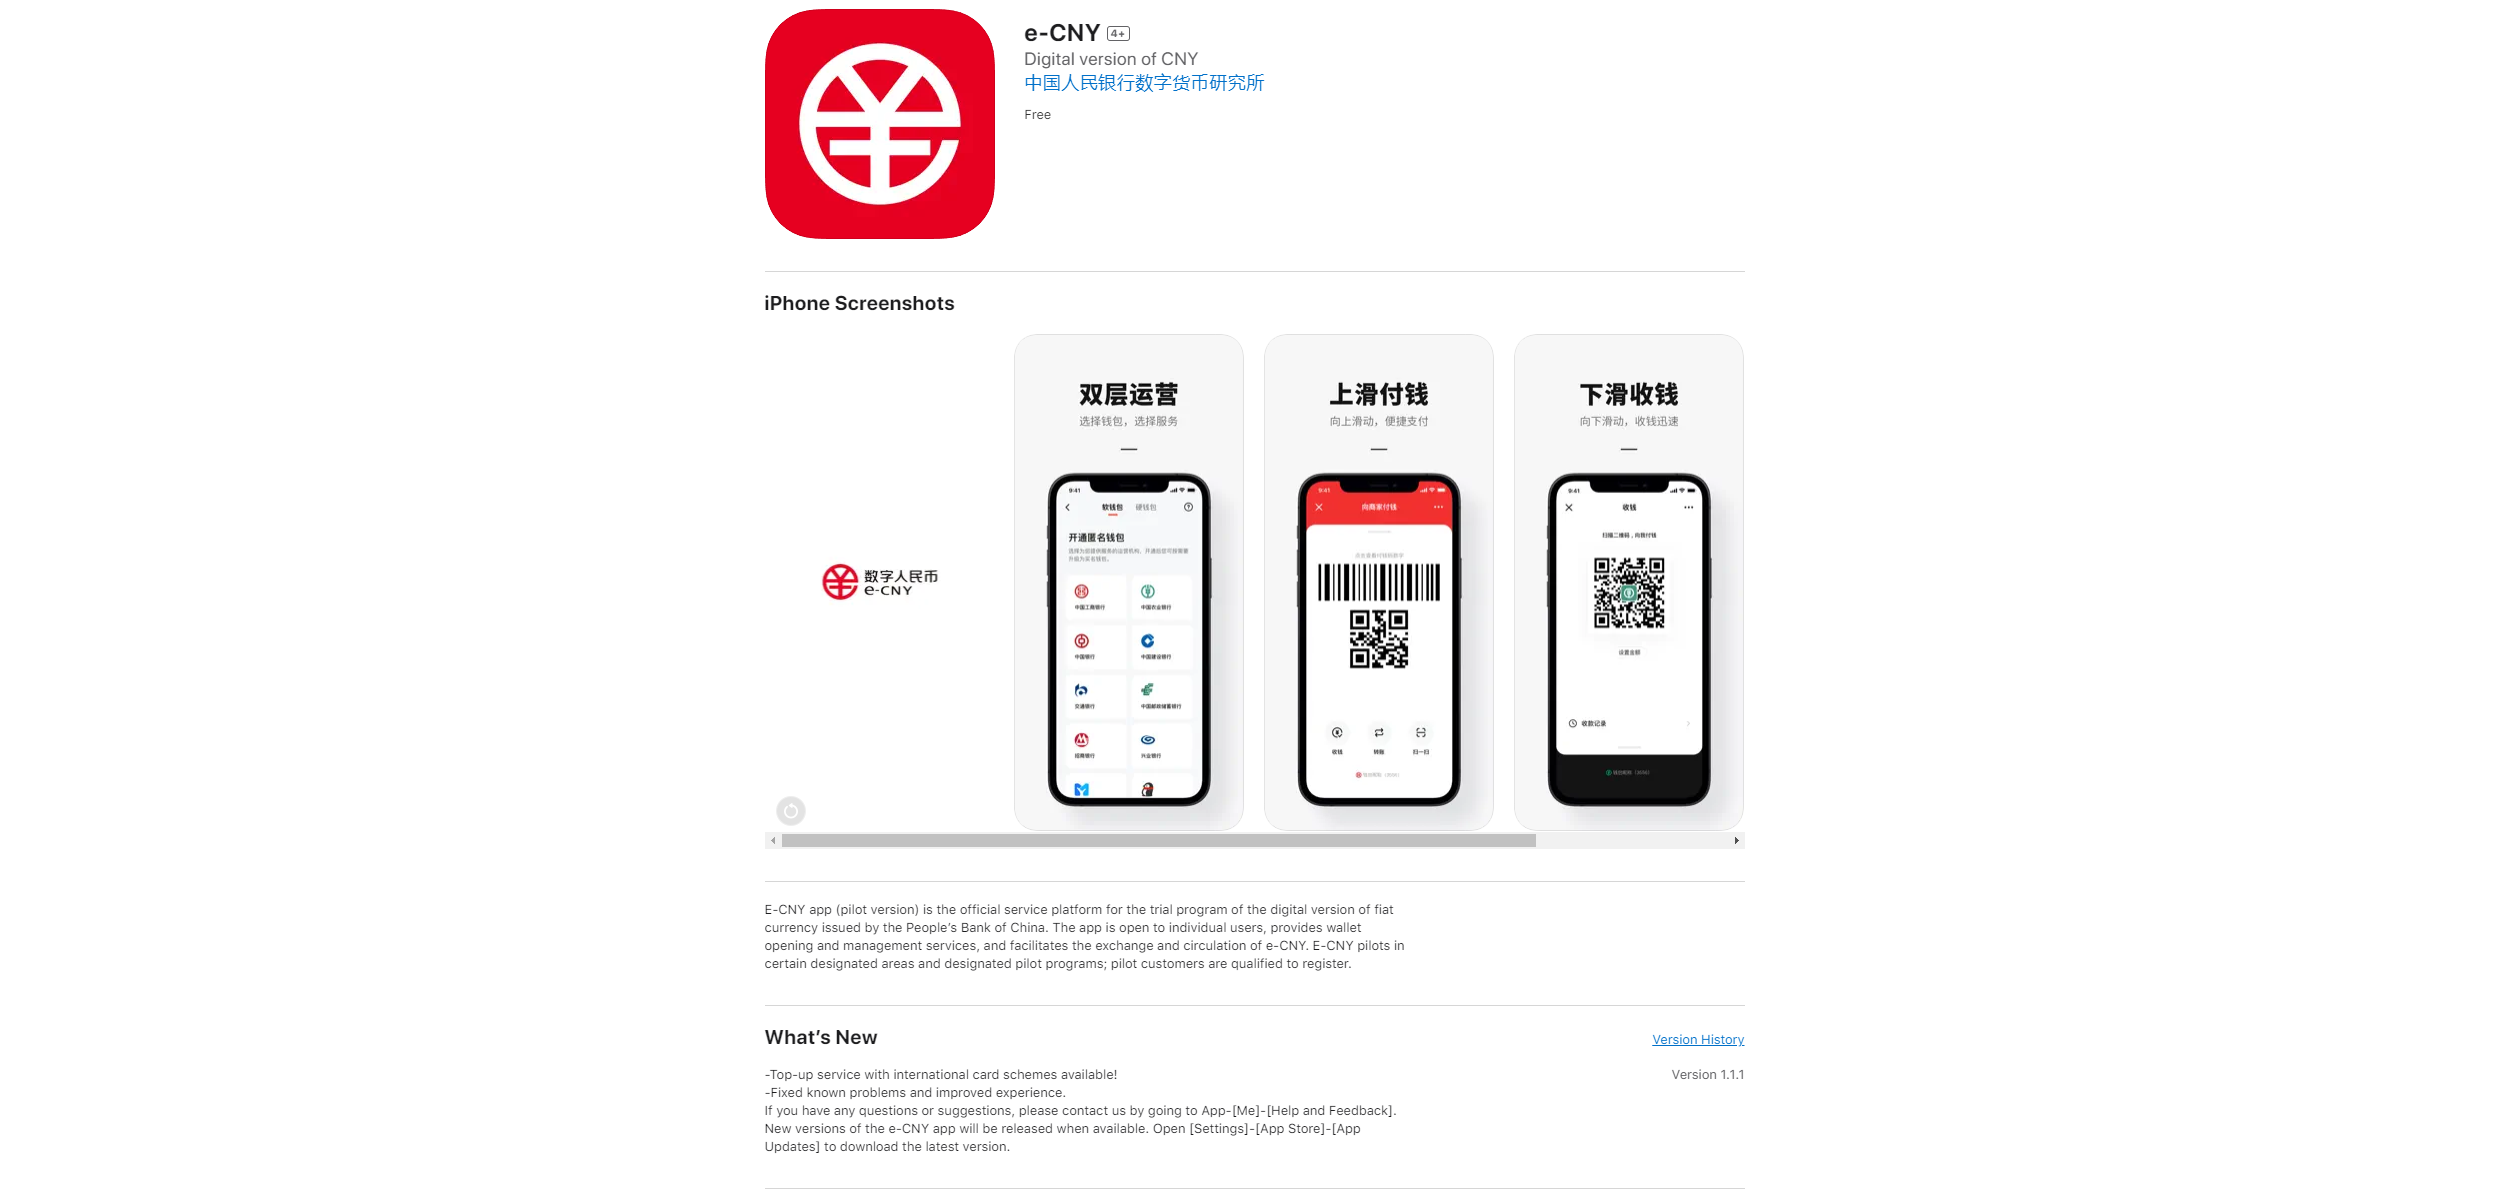 The latest version of e-CNY app on the App Store introducing the top up service for internation cards.